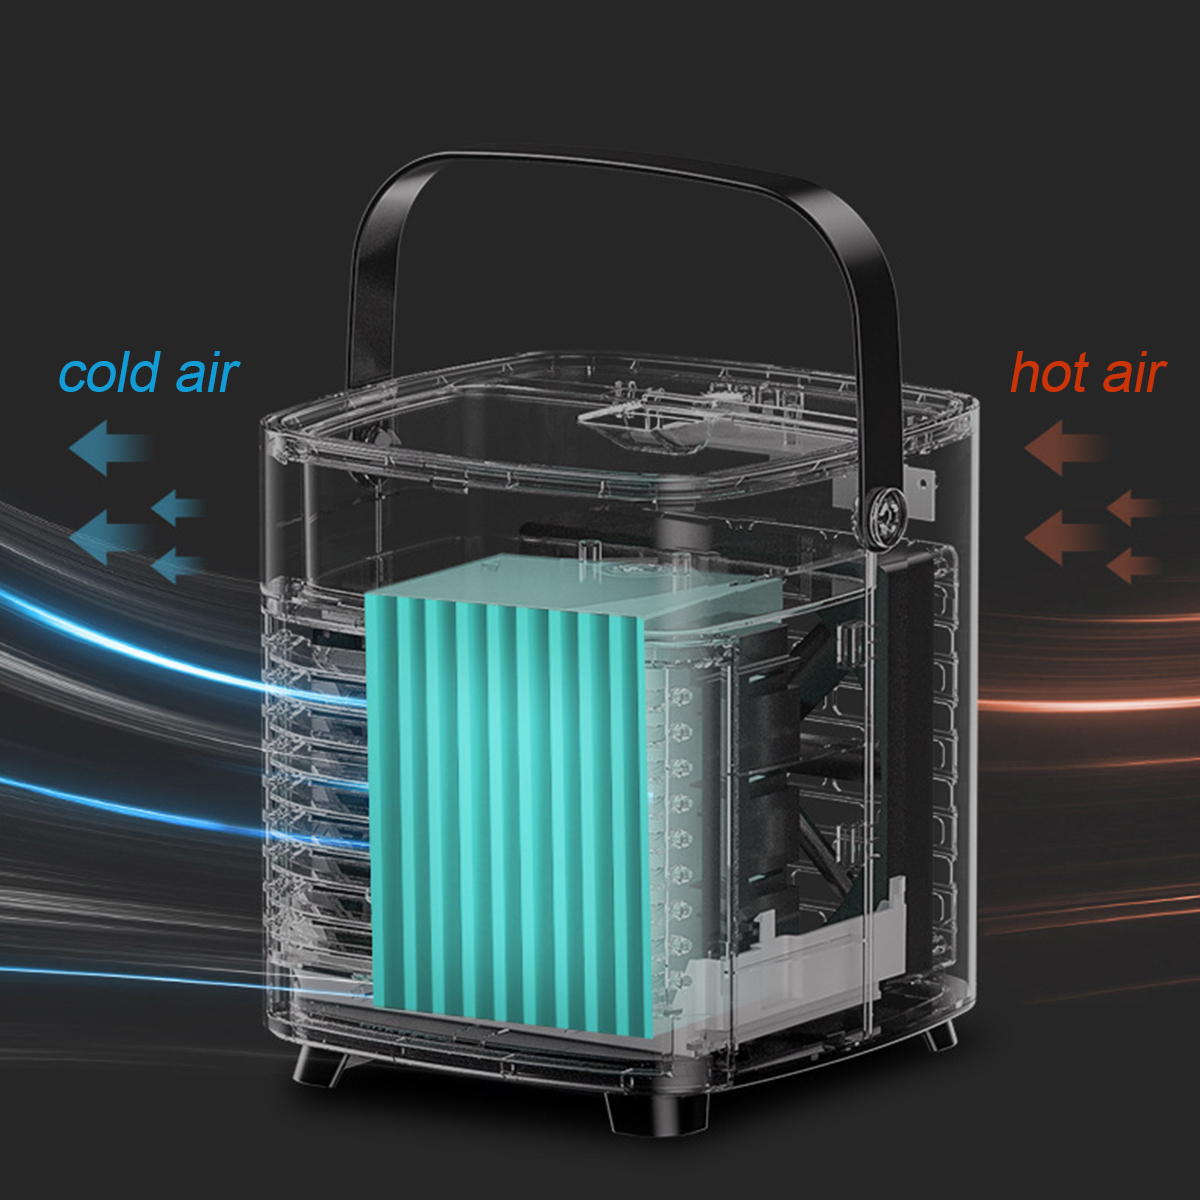 Ultra-Quiet-Portable-USB-Air-Conditioning-Fan-Bedroom-Living-Room-Office-Travel-Water-Cooling-Three--1710158-9